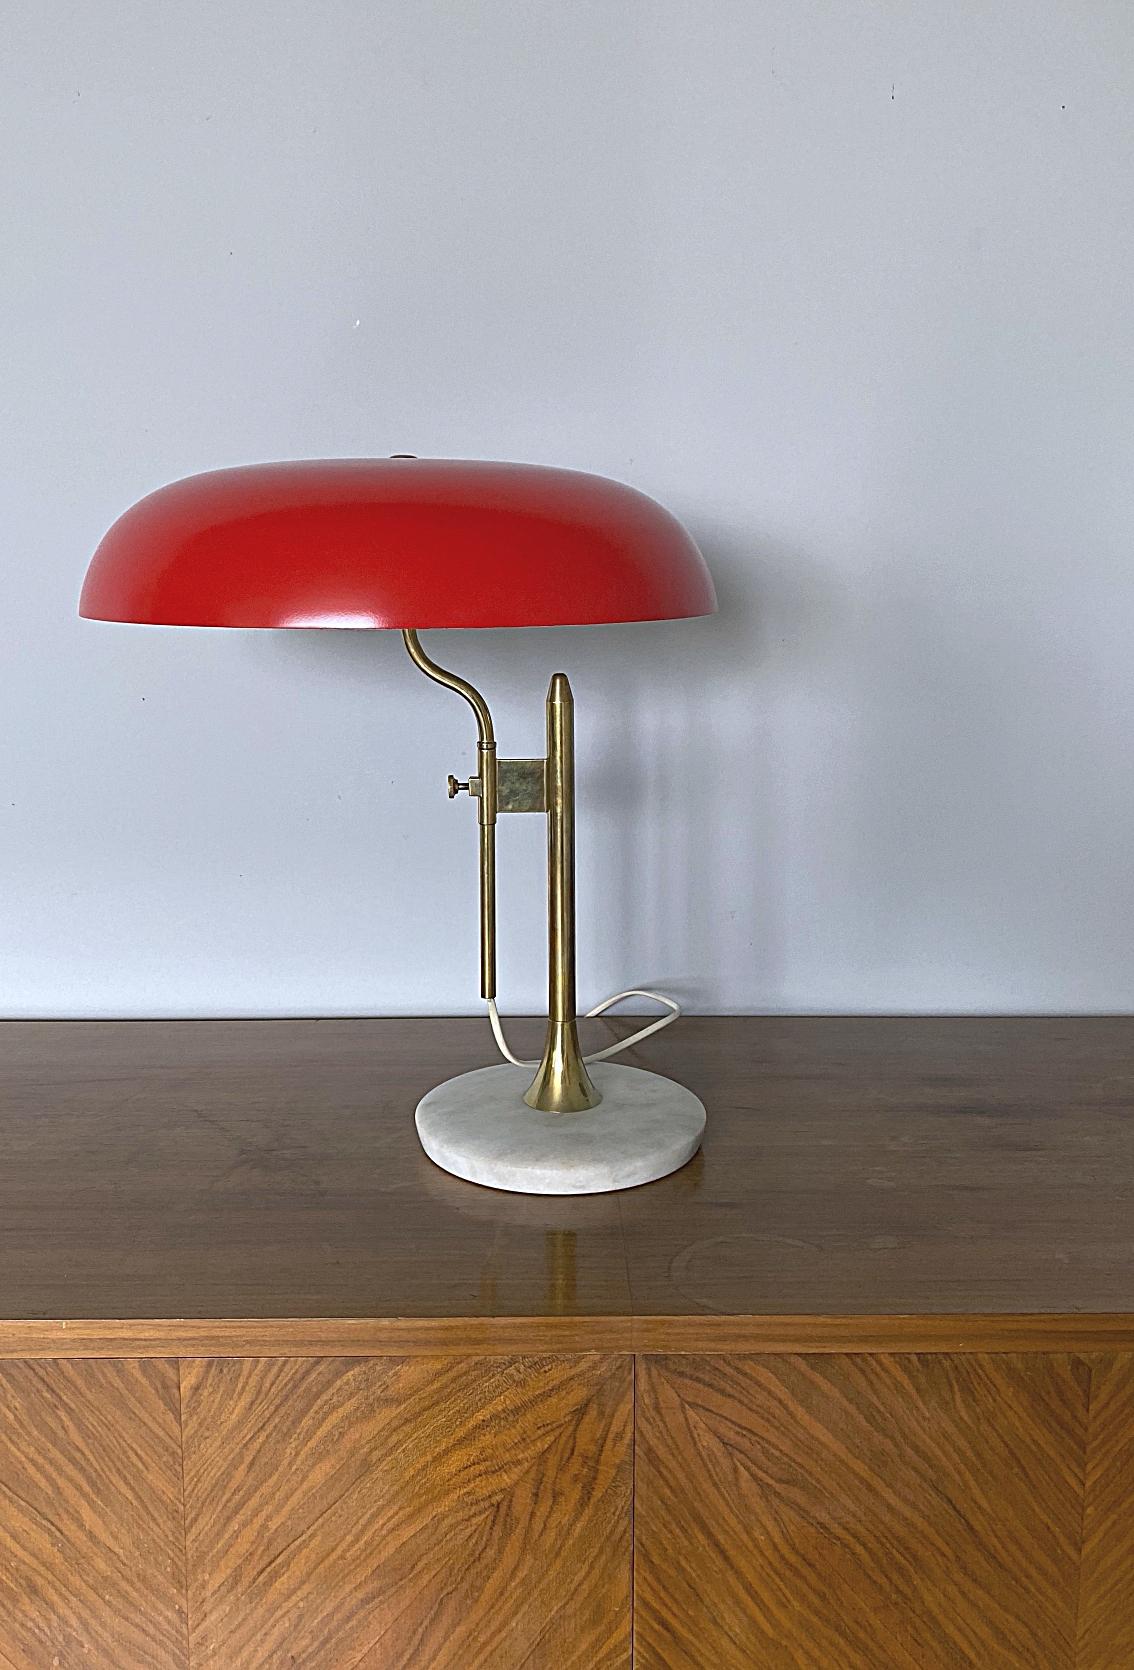 Hand-Crafted Italian Midcentury Marble Based Brass Designer Table Lamp, 1950s, Italy